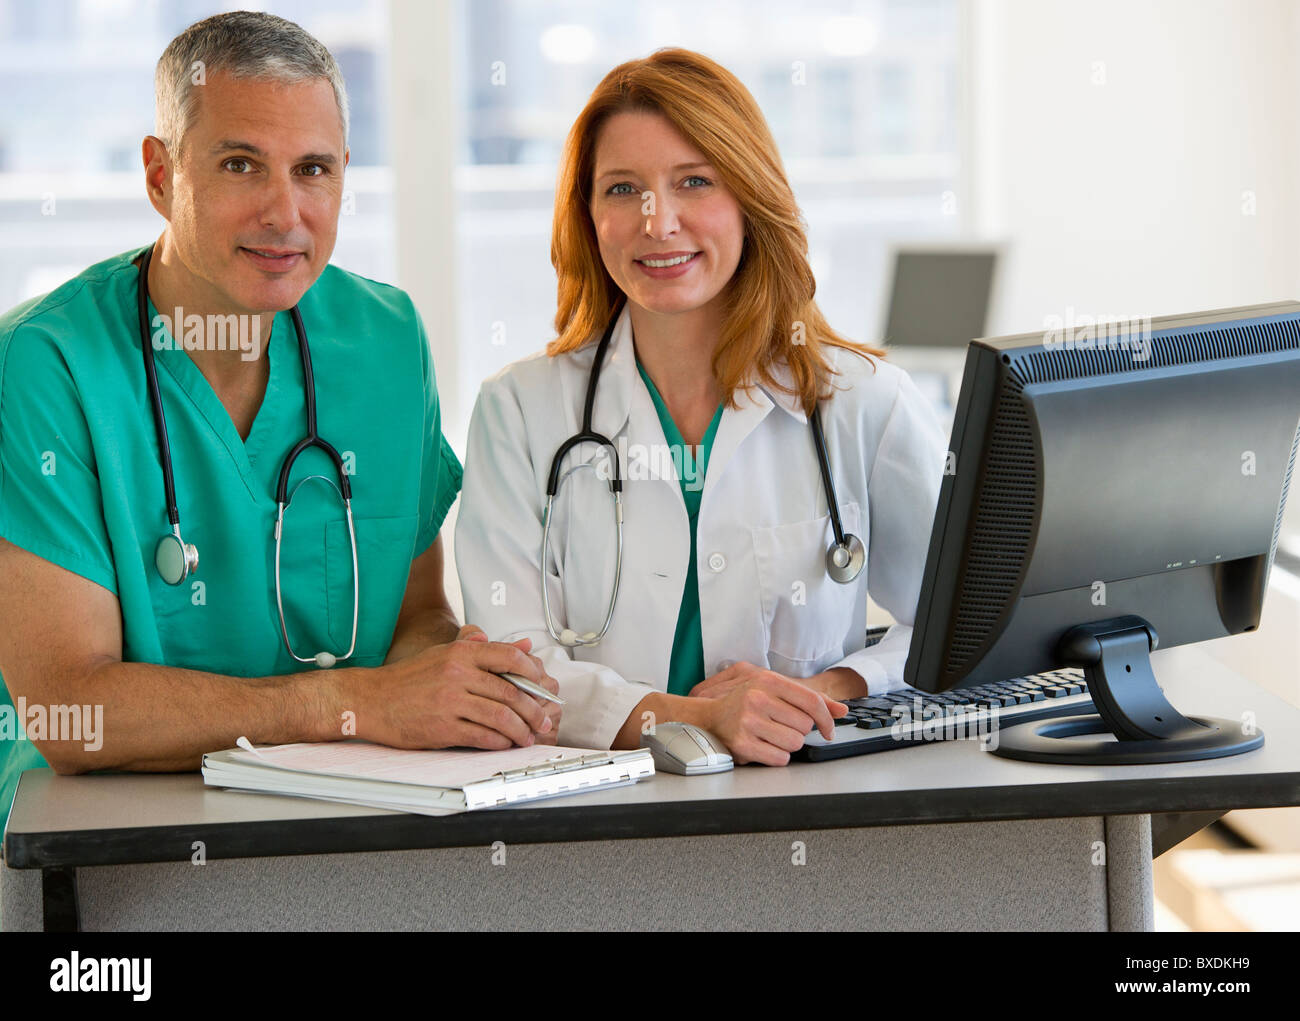 Healthcare professionals working at computer Stock Photo